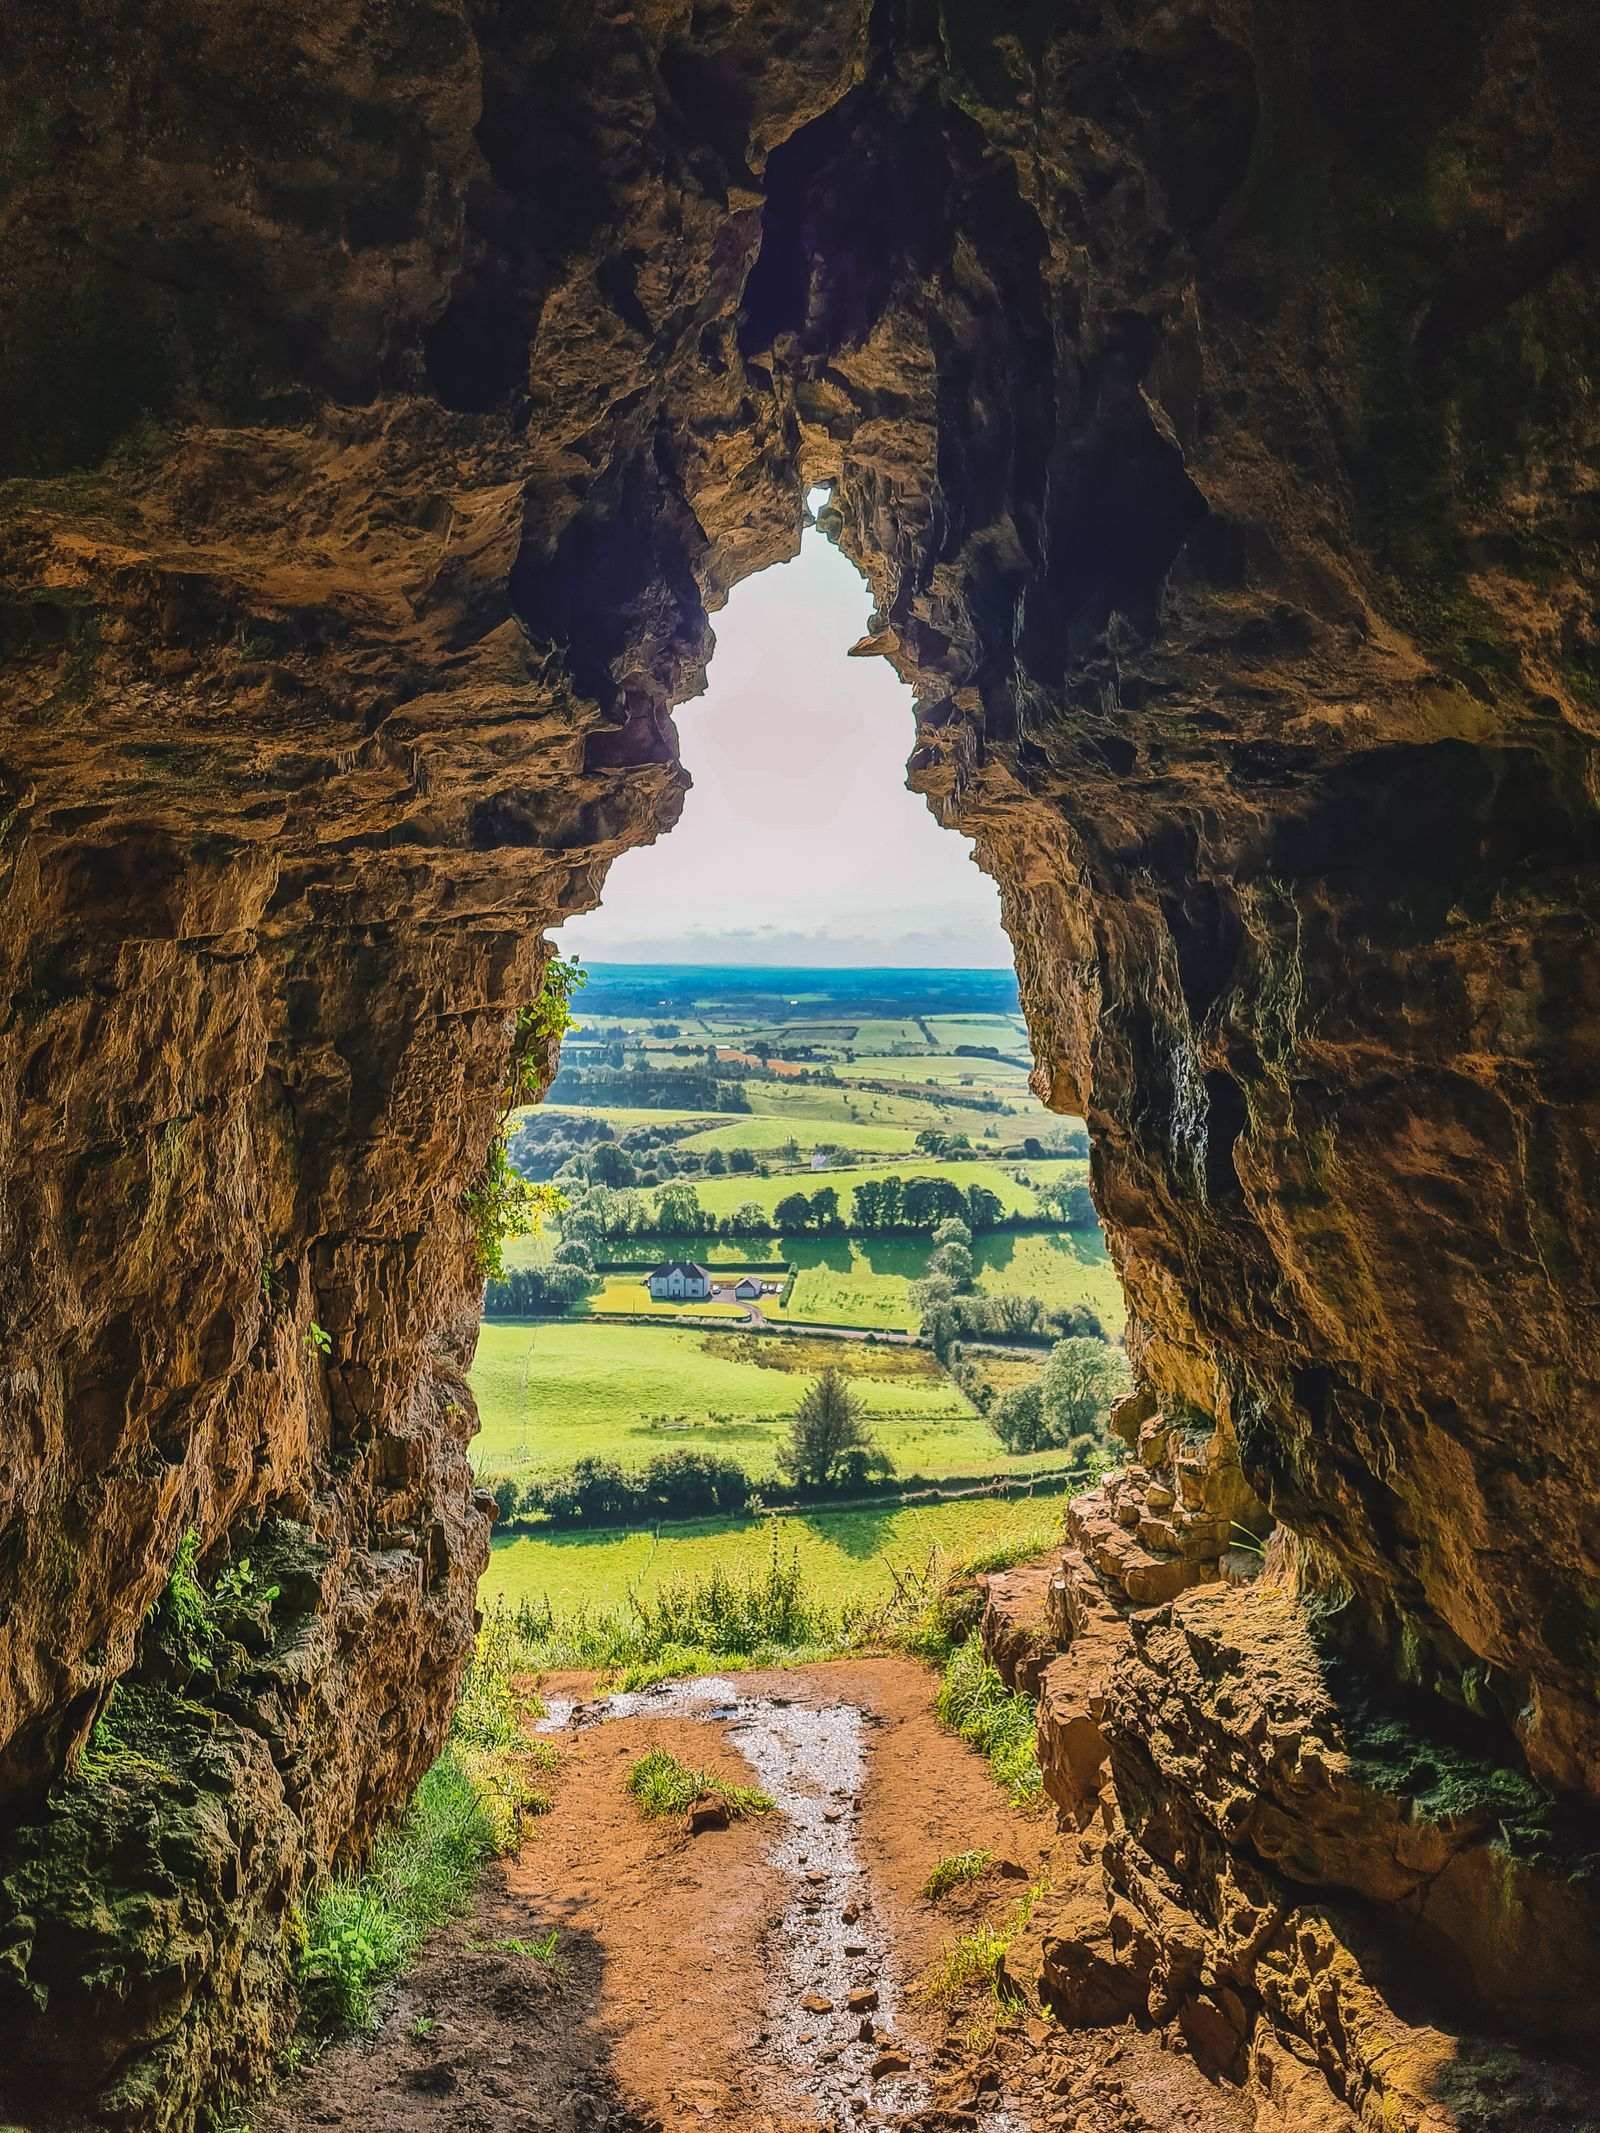 Exit of a cave looking out to a field